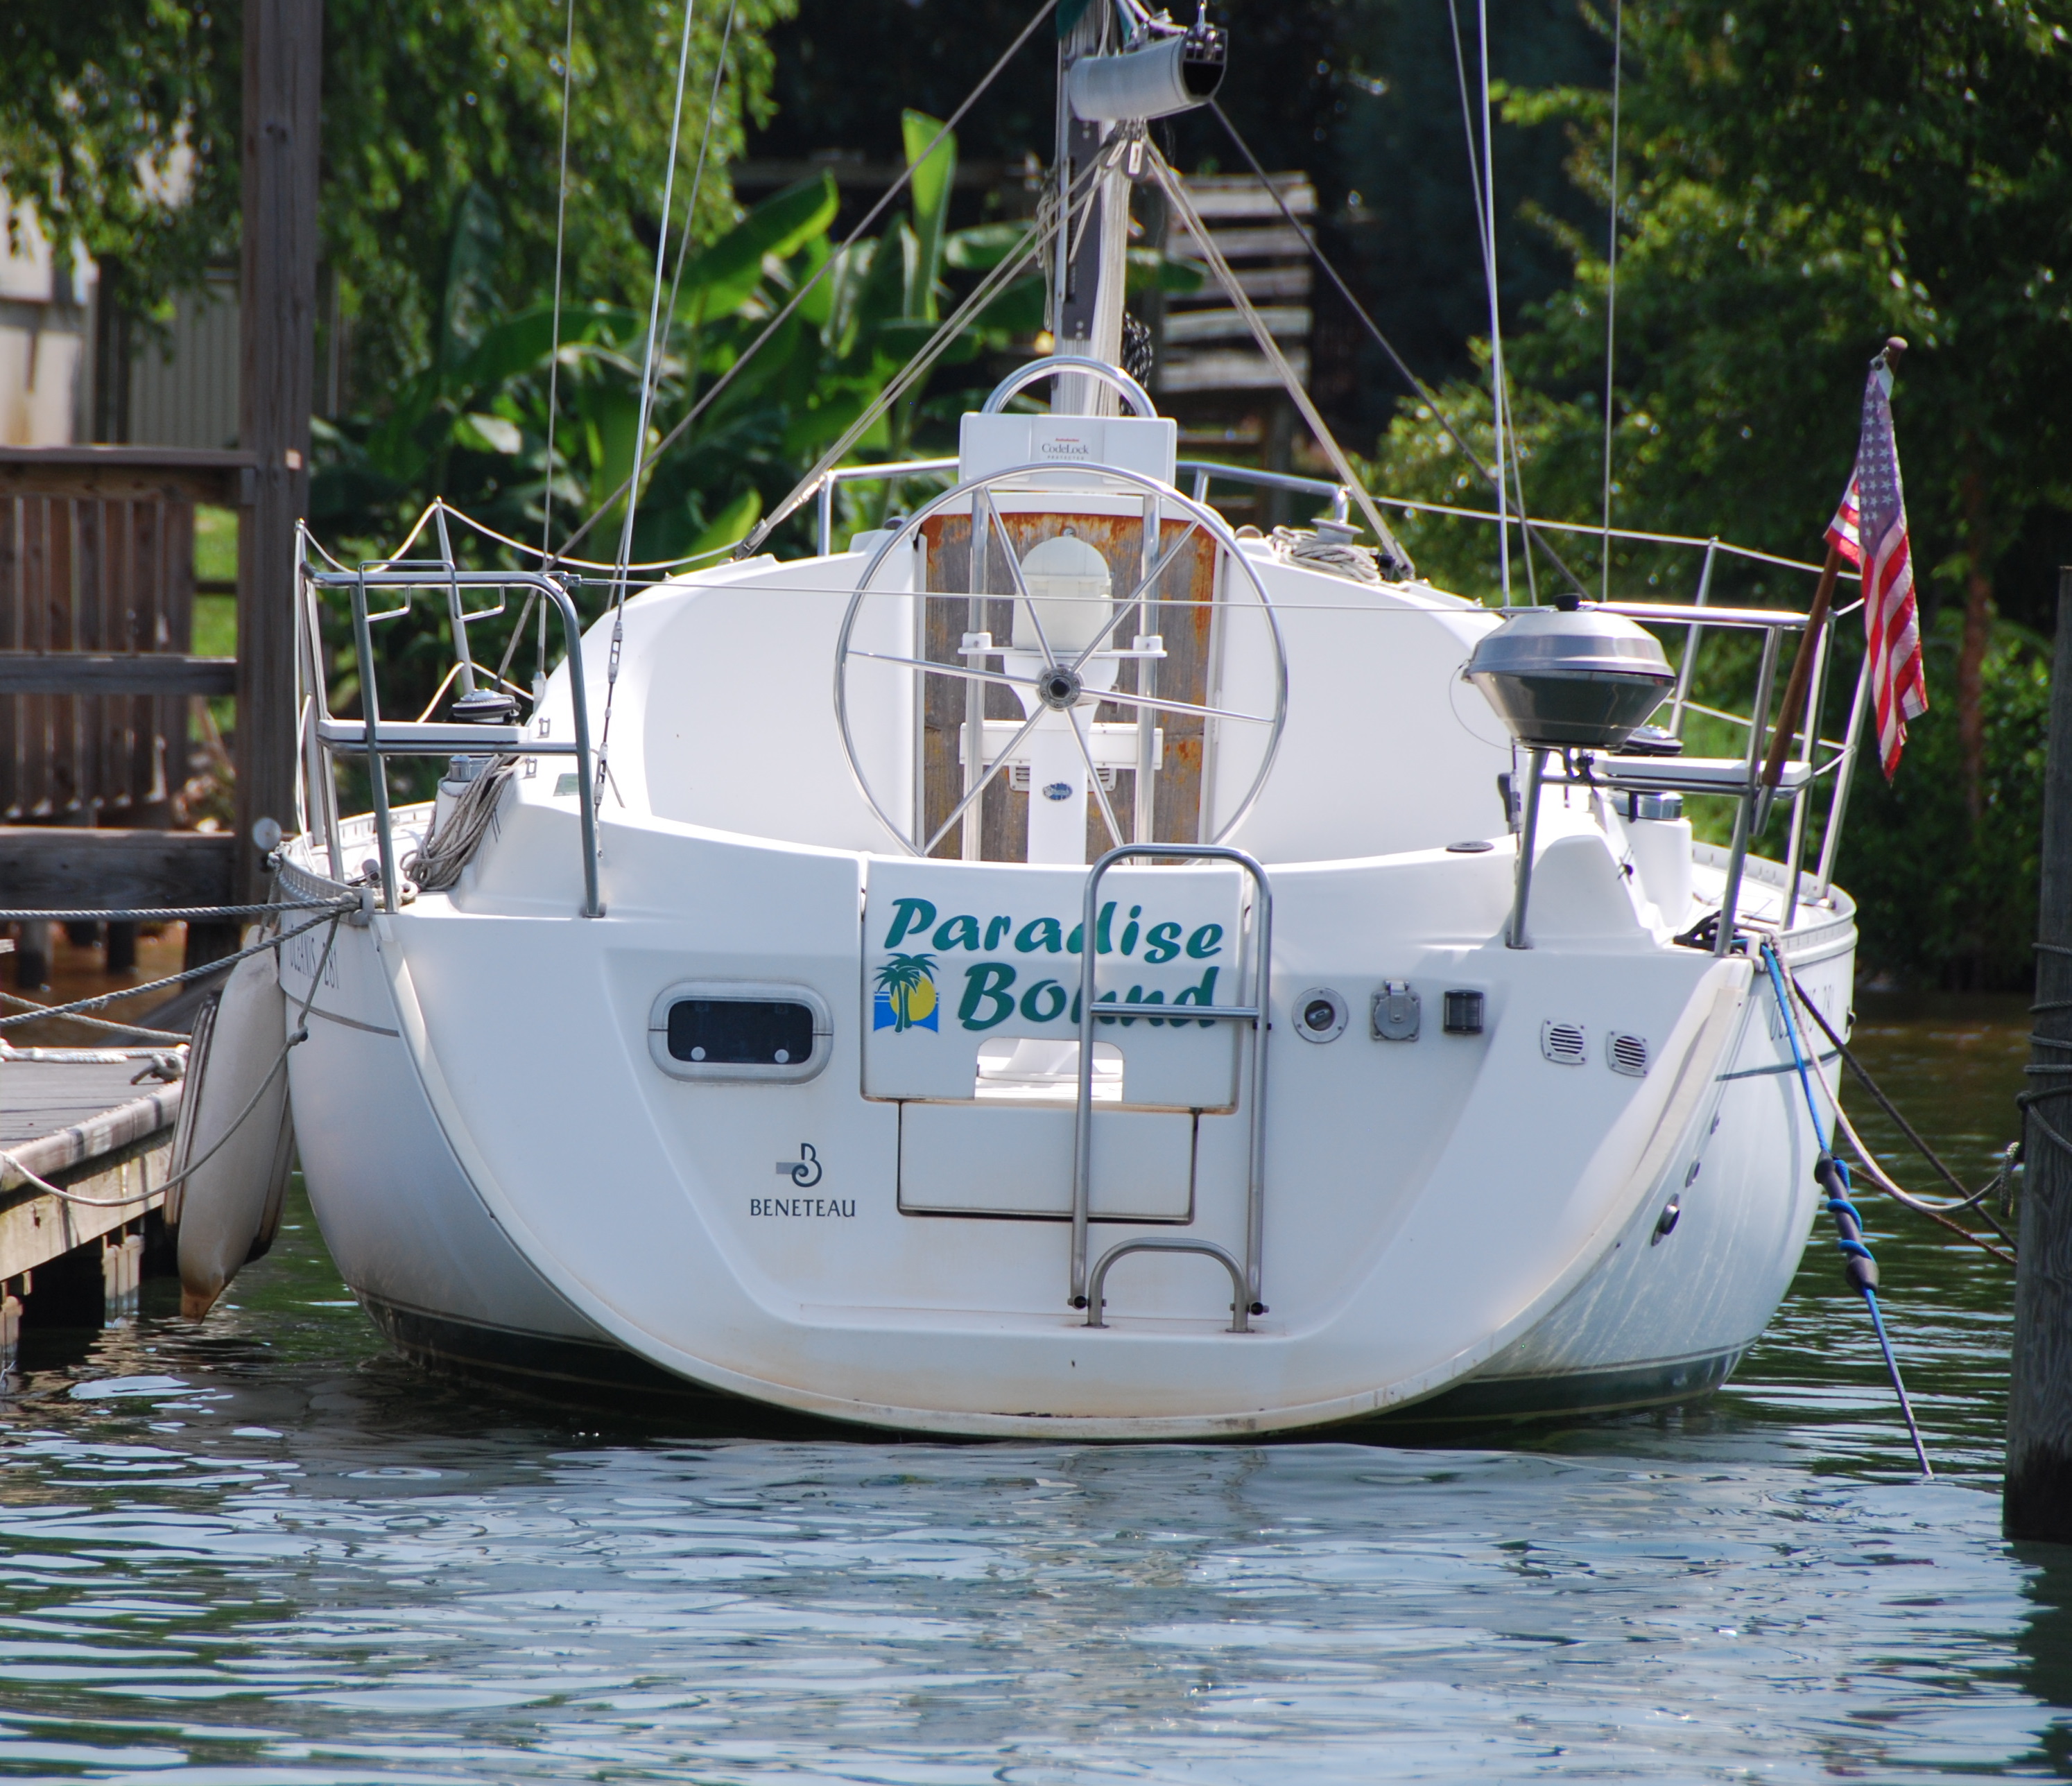 funny boat names. for oat names~ humorous,